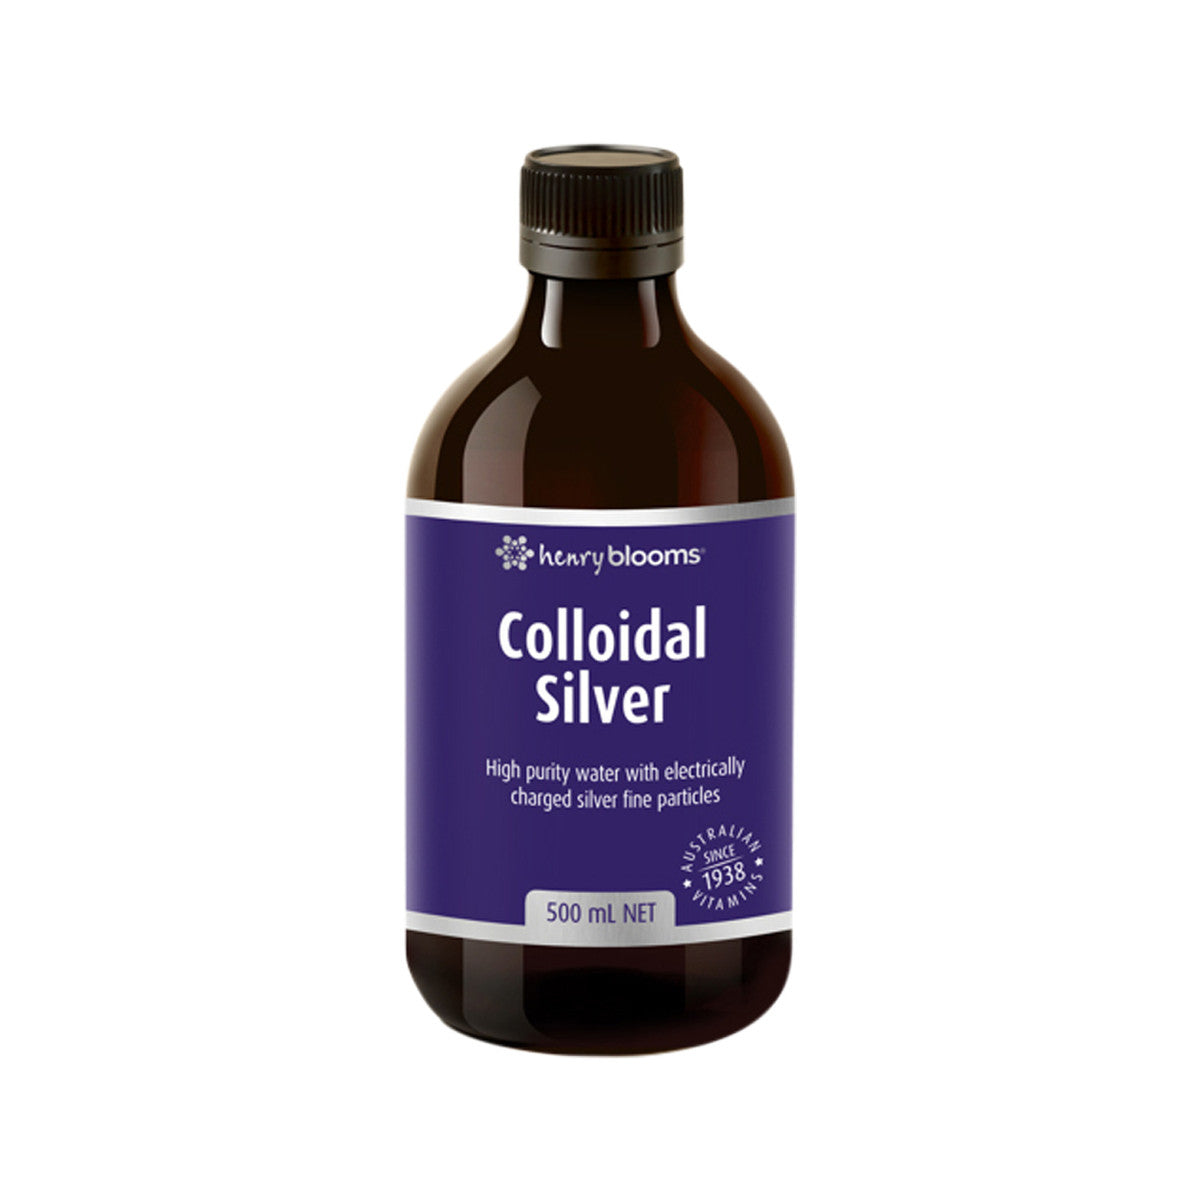 HENRY BLOOMS Colloidal Silver 500ml